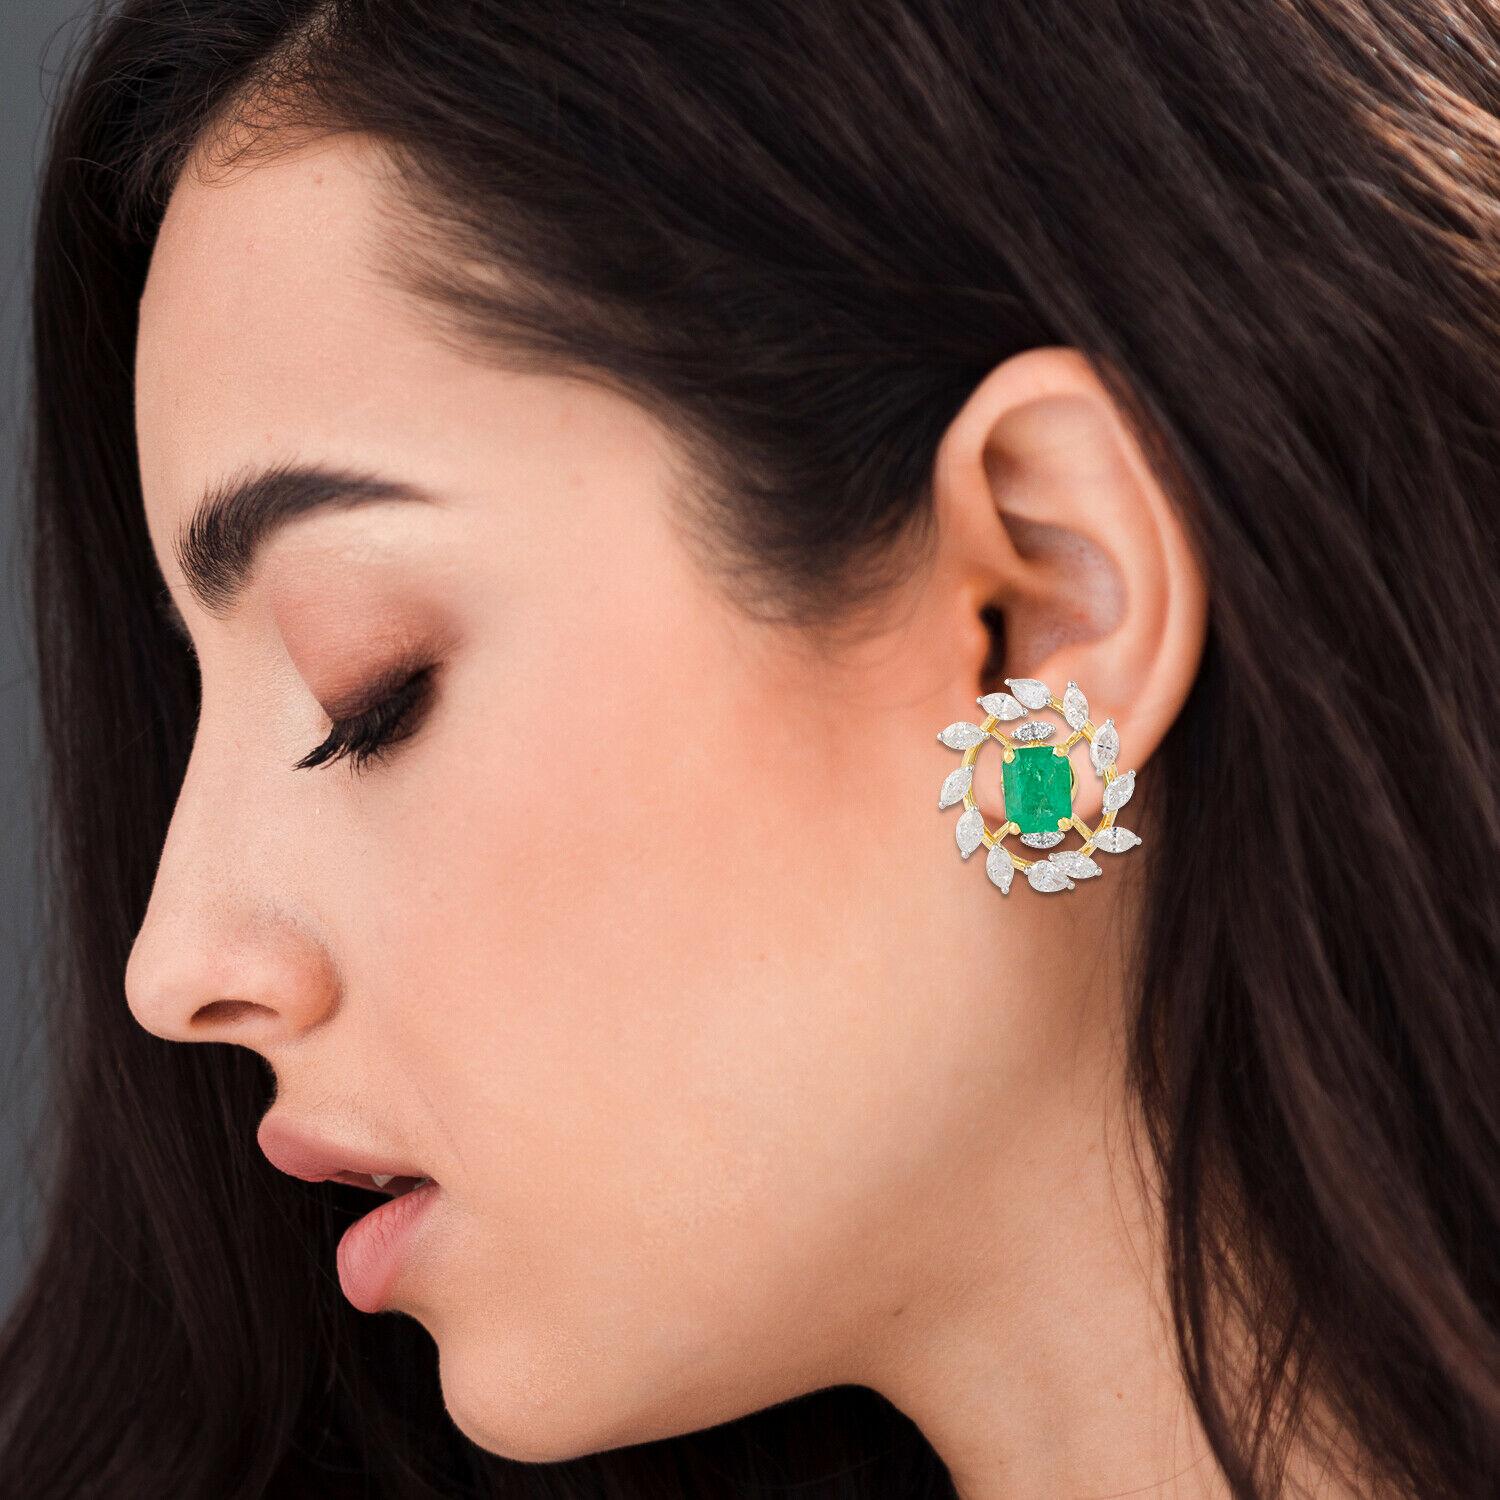 Cast in 14 karat gold, these stunning stud earrings are hand set with 3.02 carats emerald and 2.70 carats of glimmering diamonds. Available in white and yellow gold. See matching ring that compliments with these earrings.

FOLLOW MEGHNA JEWELS